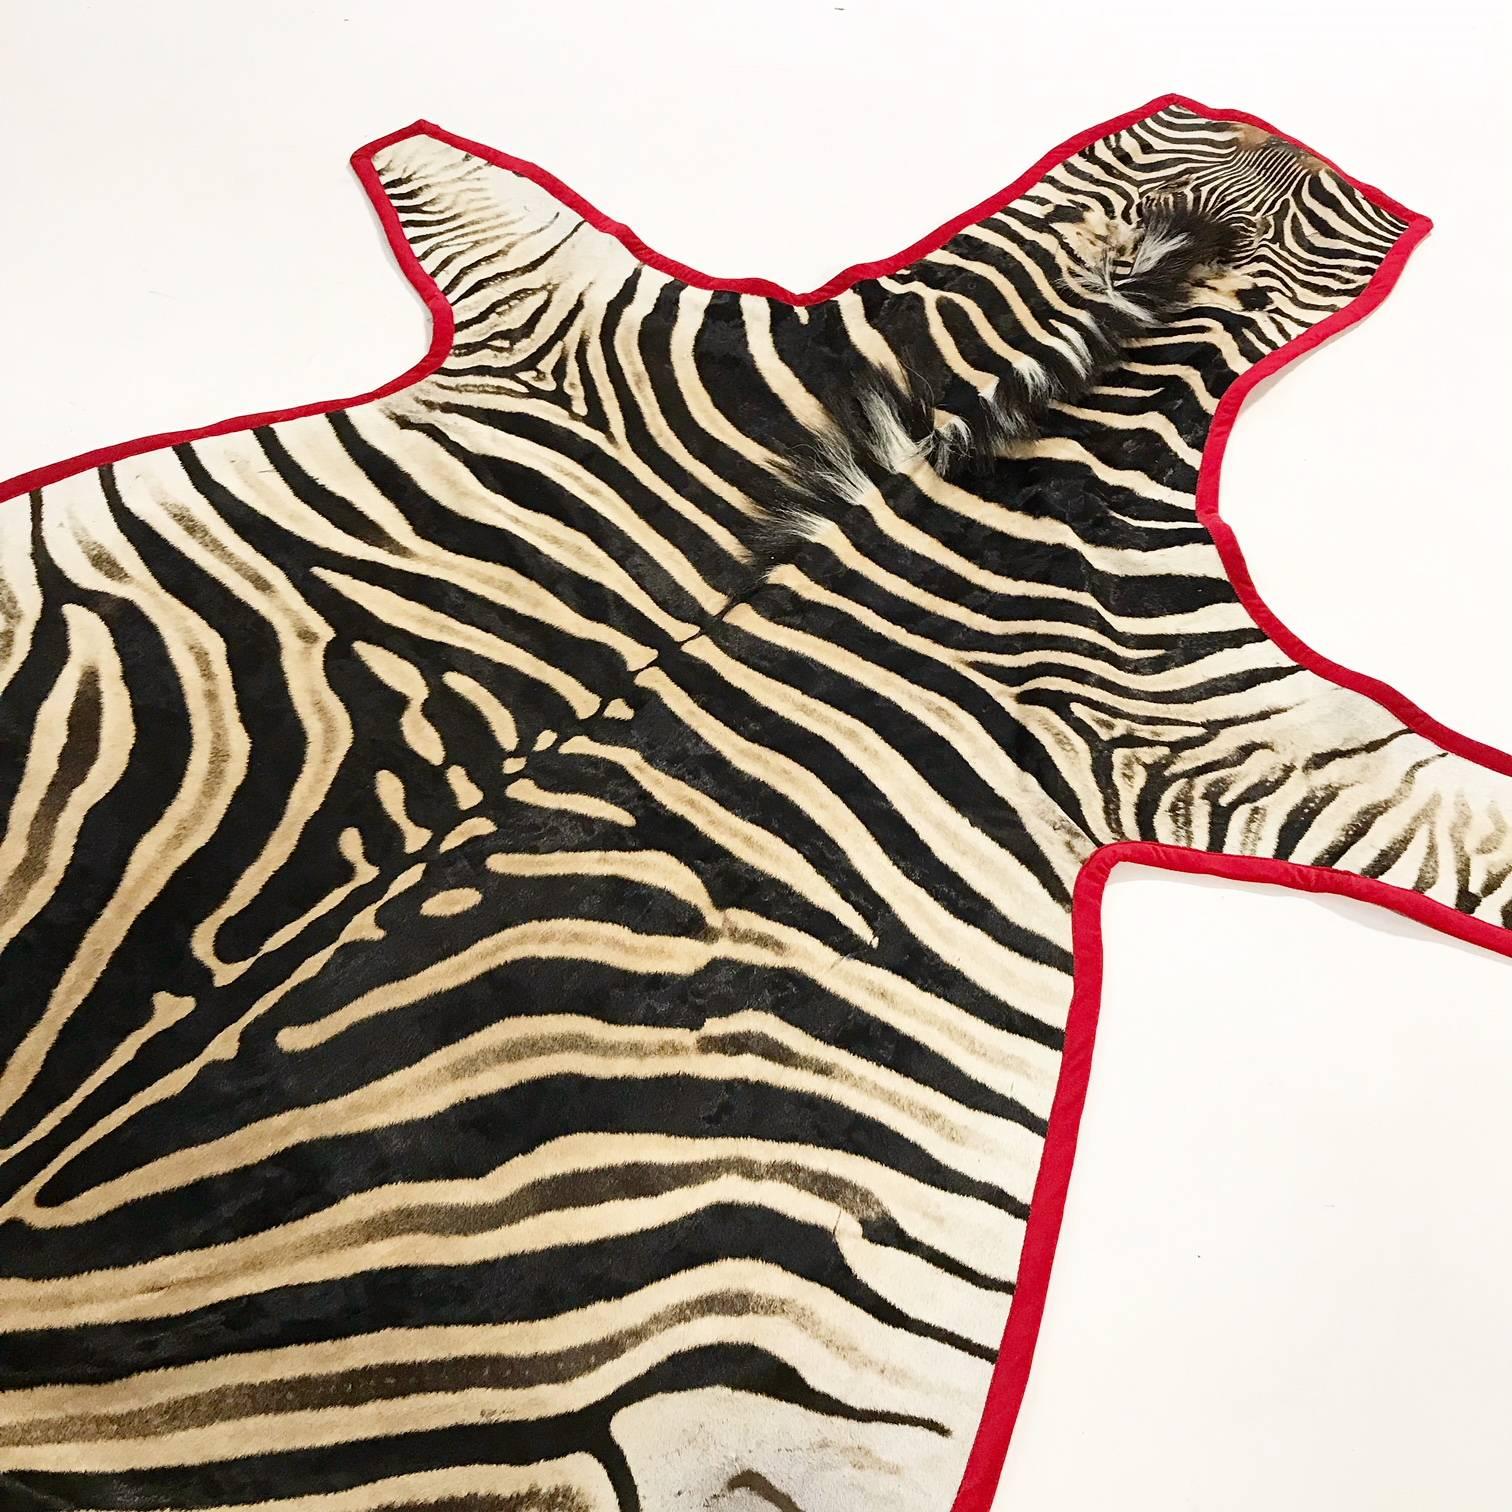 Forsyth's master upholsterers expertly trimmed this zebra hide rug in luxurious red velvet. The hue adds the perfect POP of color to the graphic zebra.